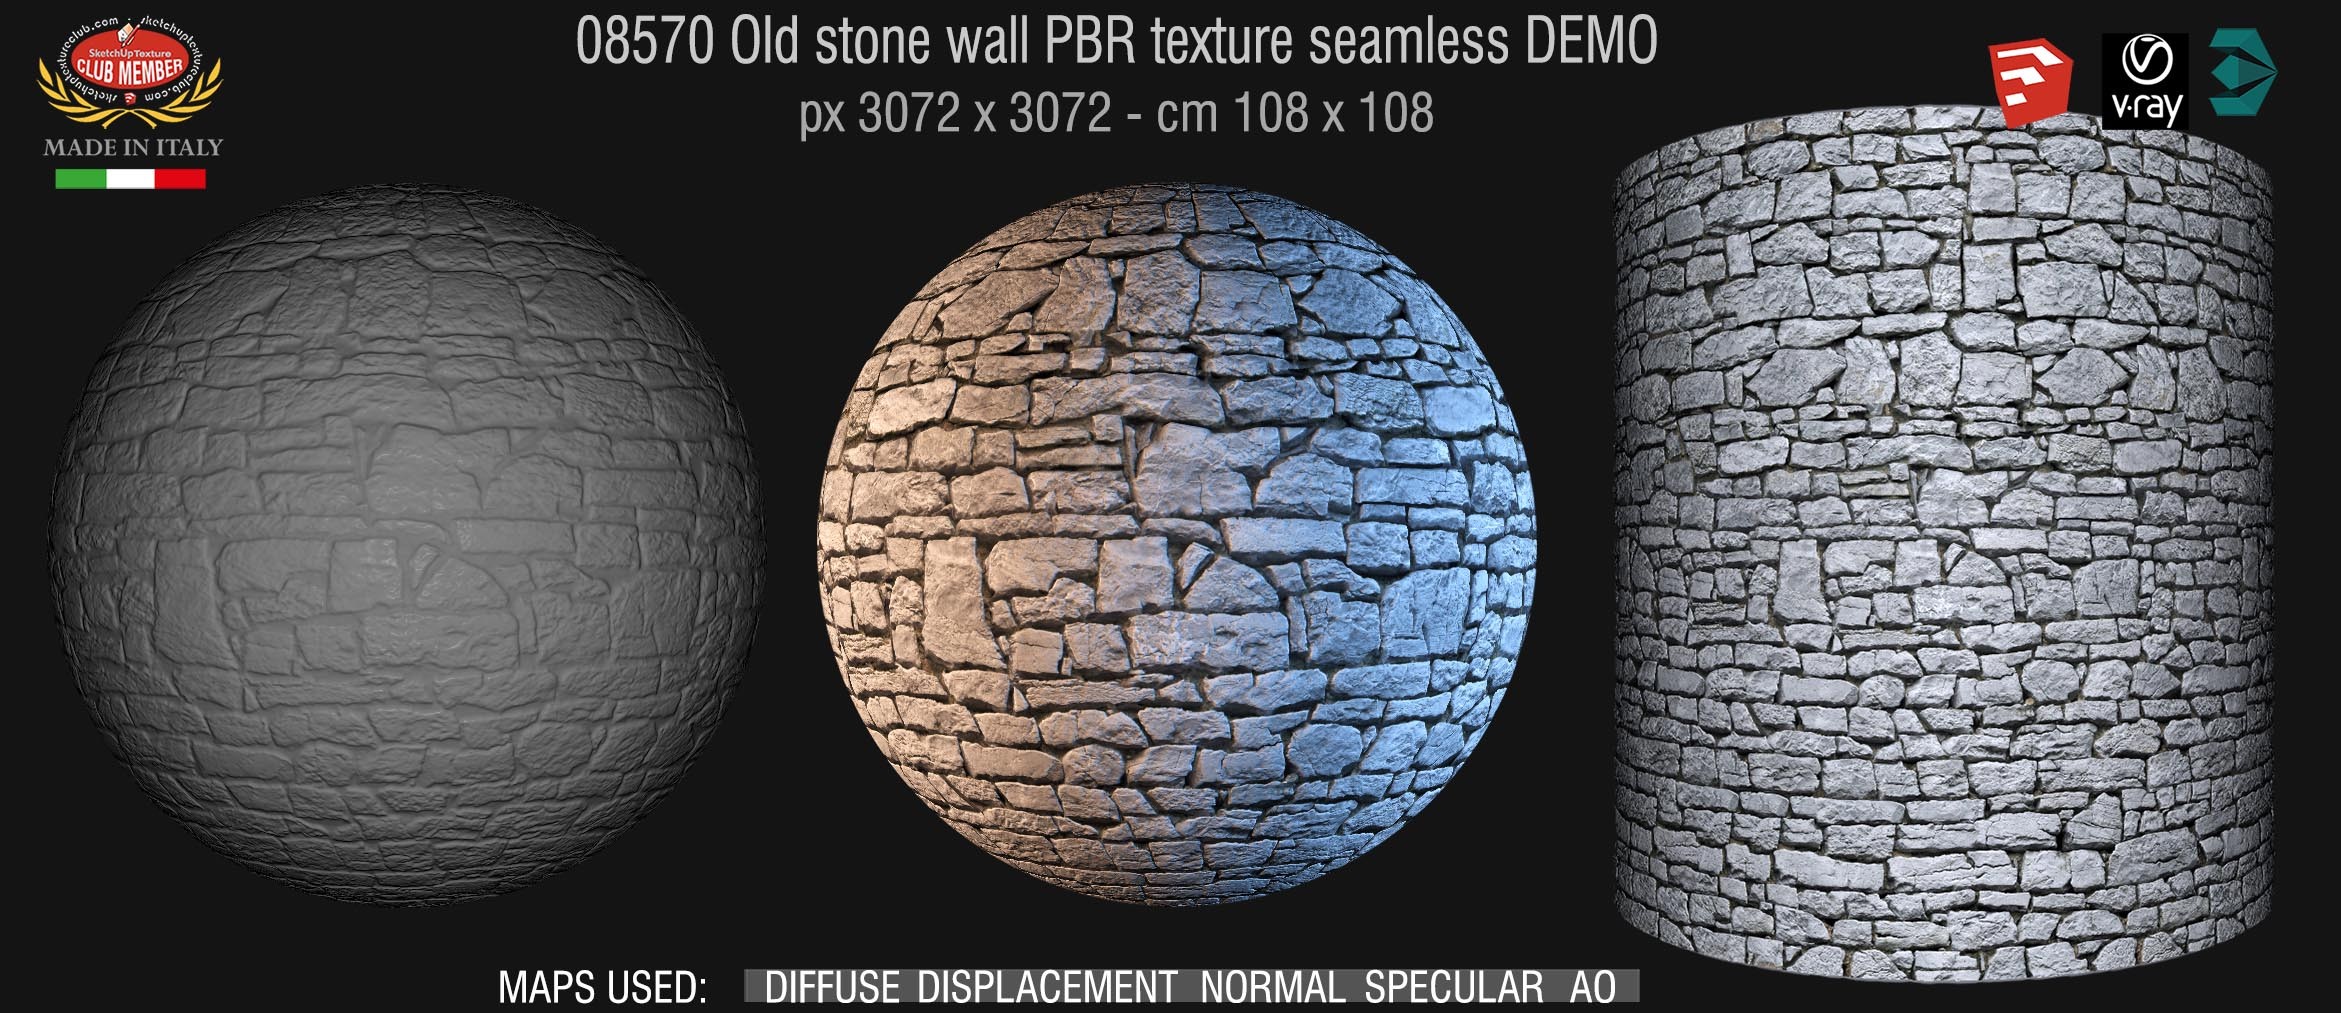 08570 Old stone wall PBR texture seamless DEMO